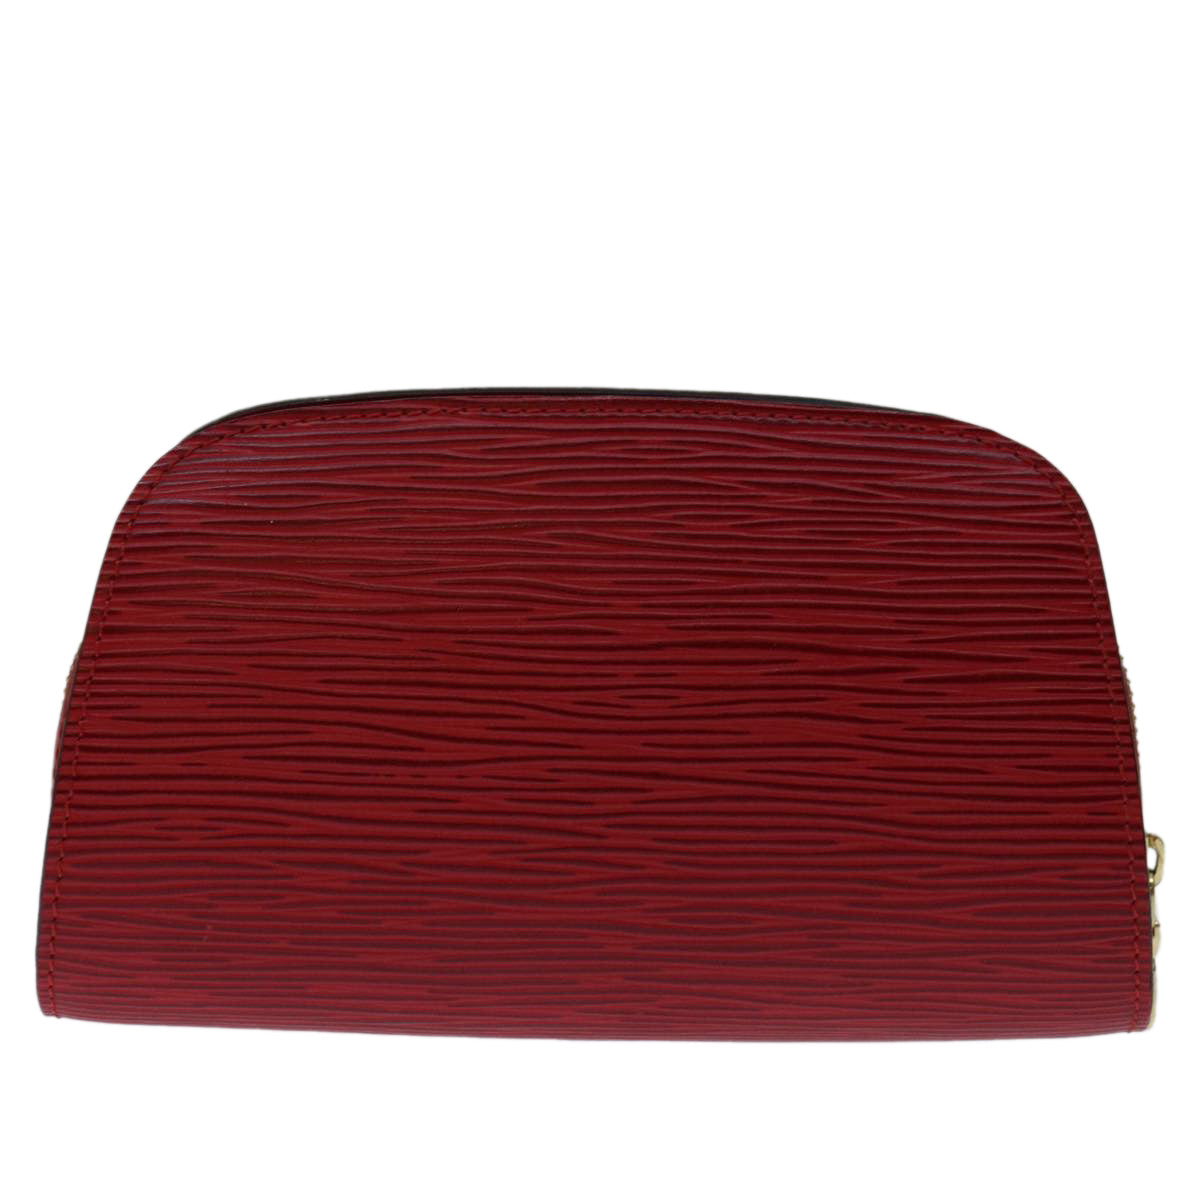 LOUIS VUITTON Epi Dauphine PM Pouch Red M48447 LV Auth ep3876 - 0